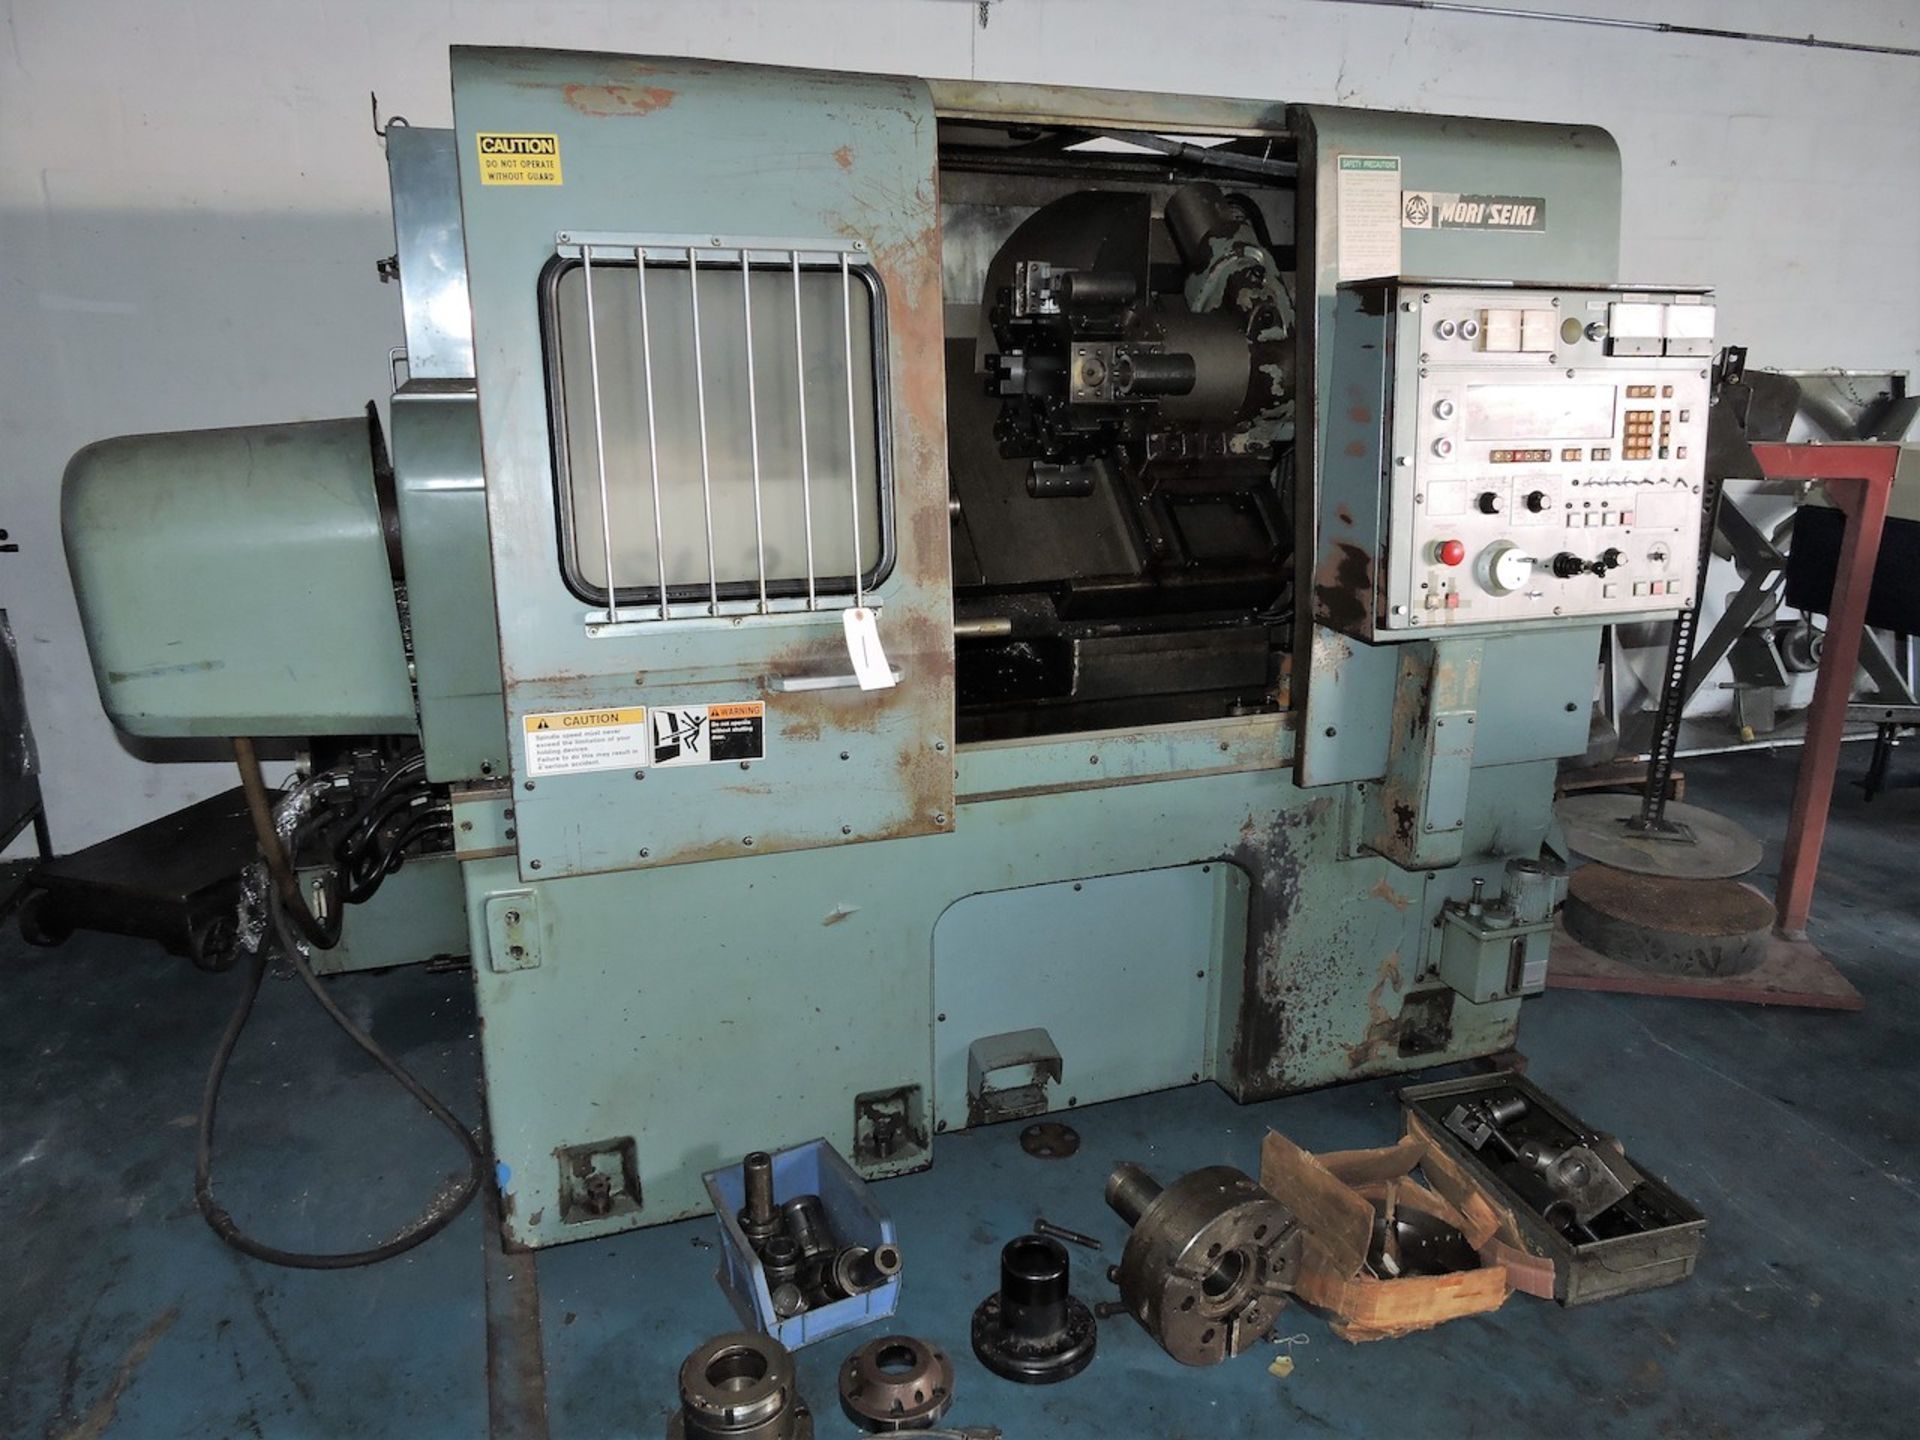 MORI SEIKI SL-2B TURNING CENTER WITH YASNAC CONTROL, 8 STATION TURRET, TOOLING, CHUCK AND COLLET - Image 6 of 16